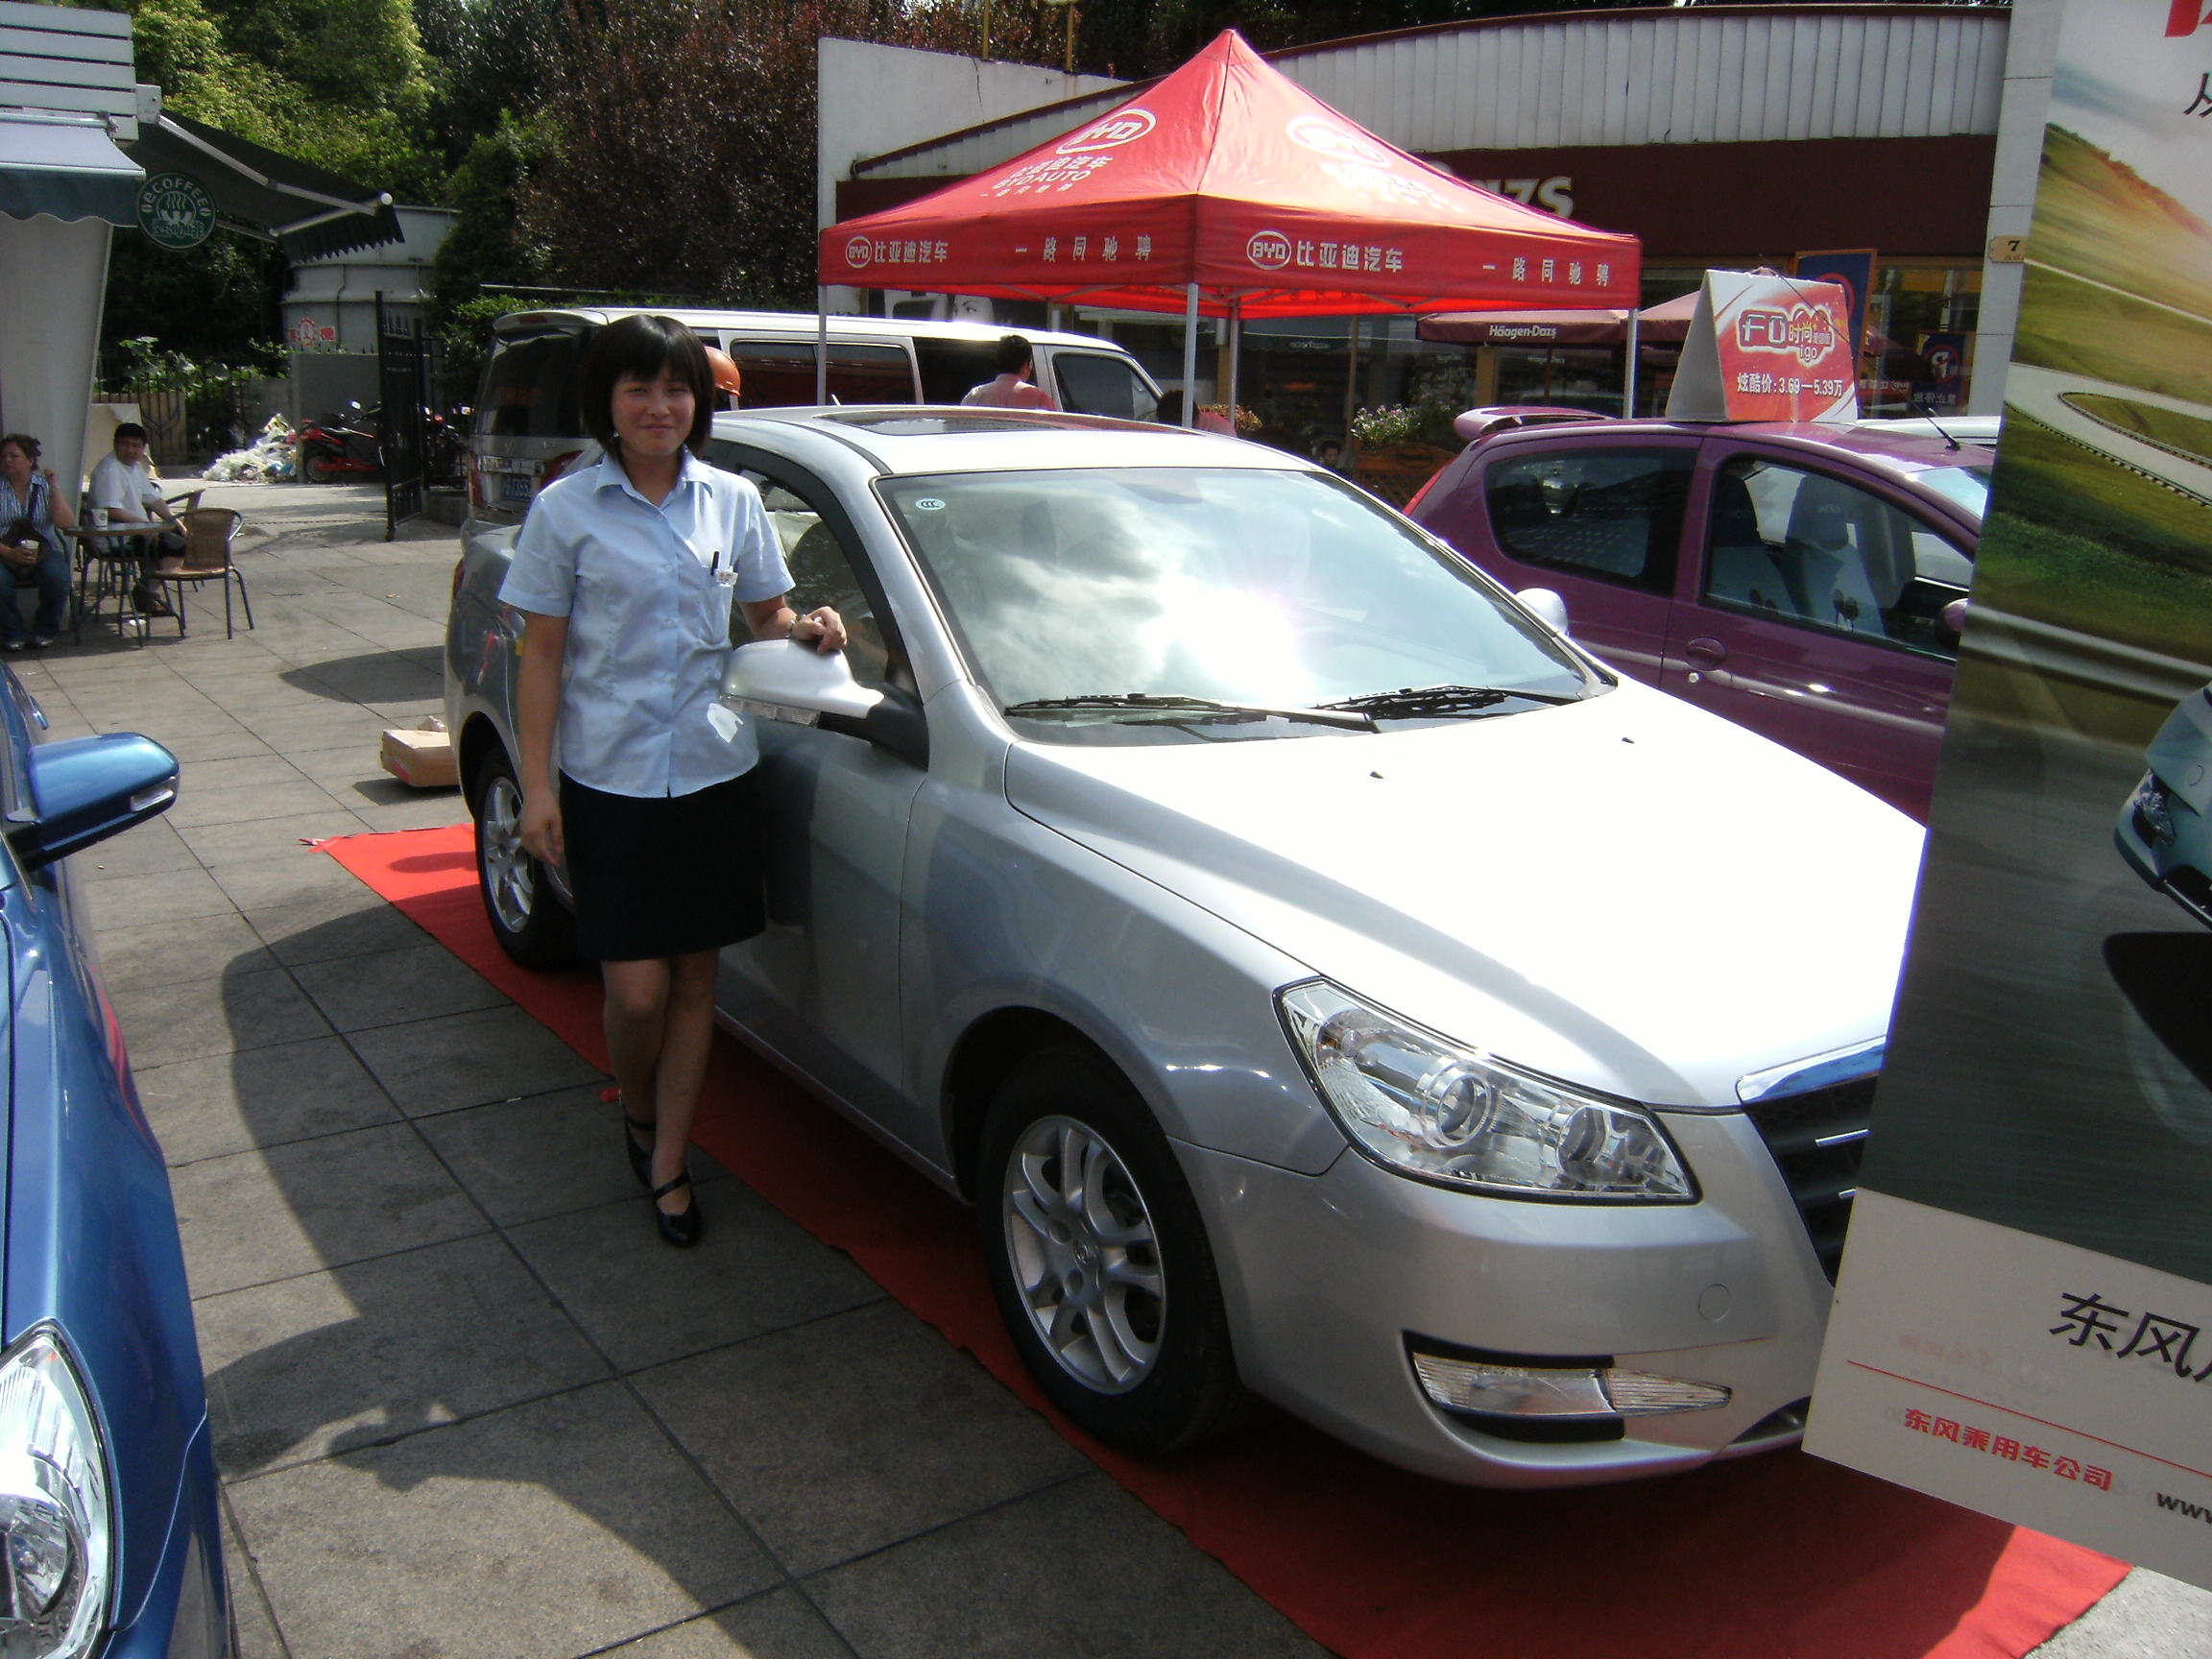 Modeling the new Dongfeng S30 | Flickr - Photo Sharing!